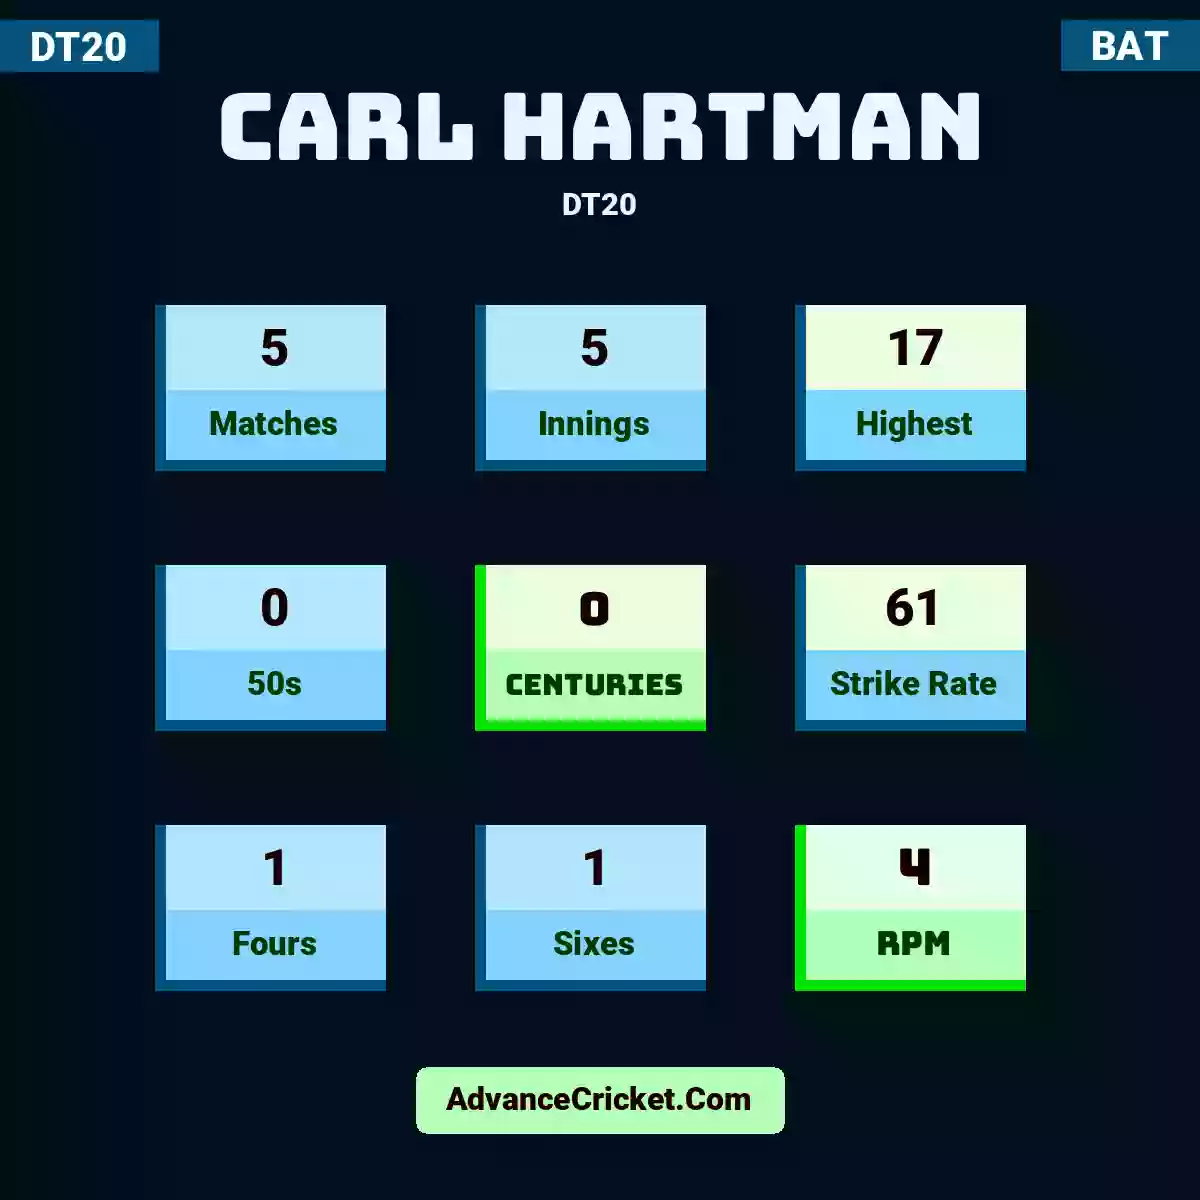 Carl Hartman DT20 , Carl Hartman played 5 matches, scored 17 runs as highest, 0 half-centuries, and 0 centuries, with a strike rate of 61. C.Hartman hit 1 fours and 1 sixes, with an RPM of 4.